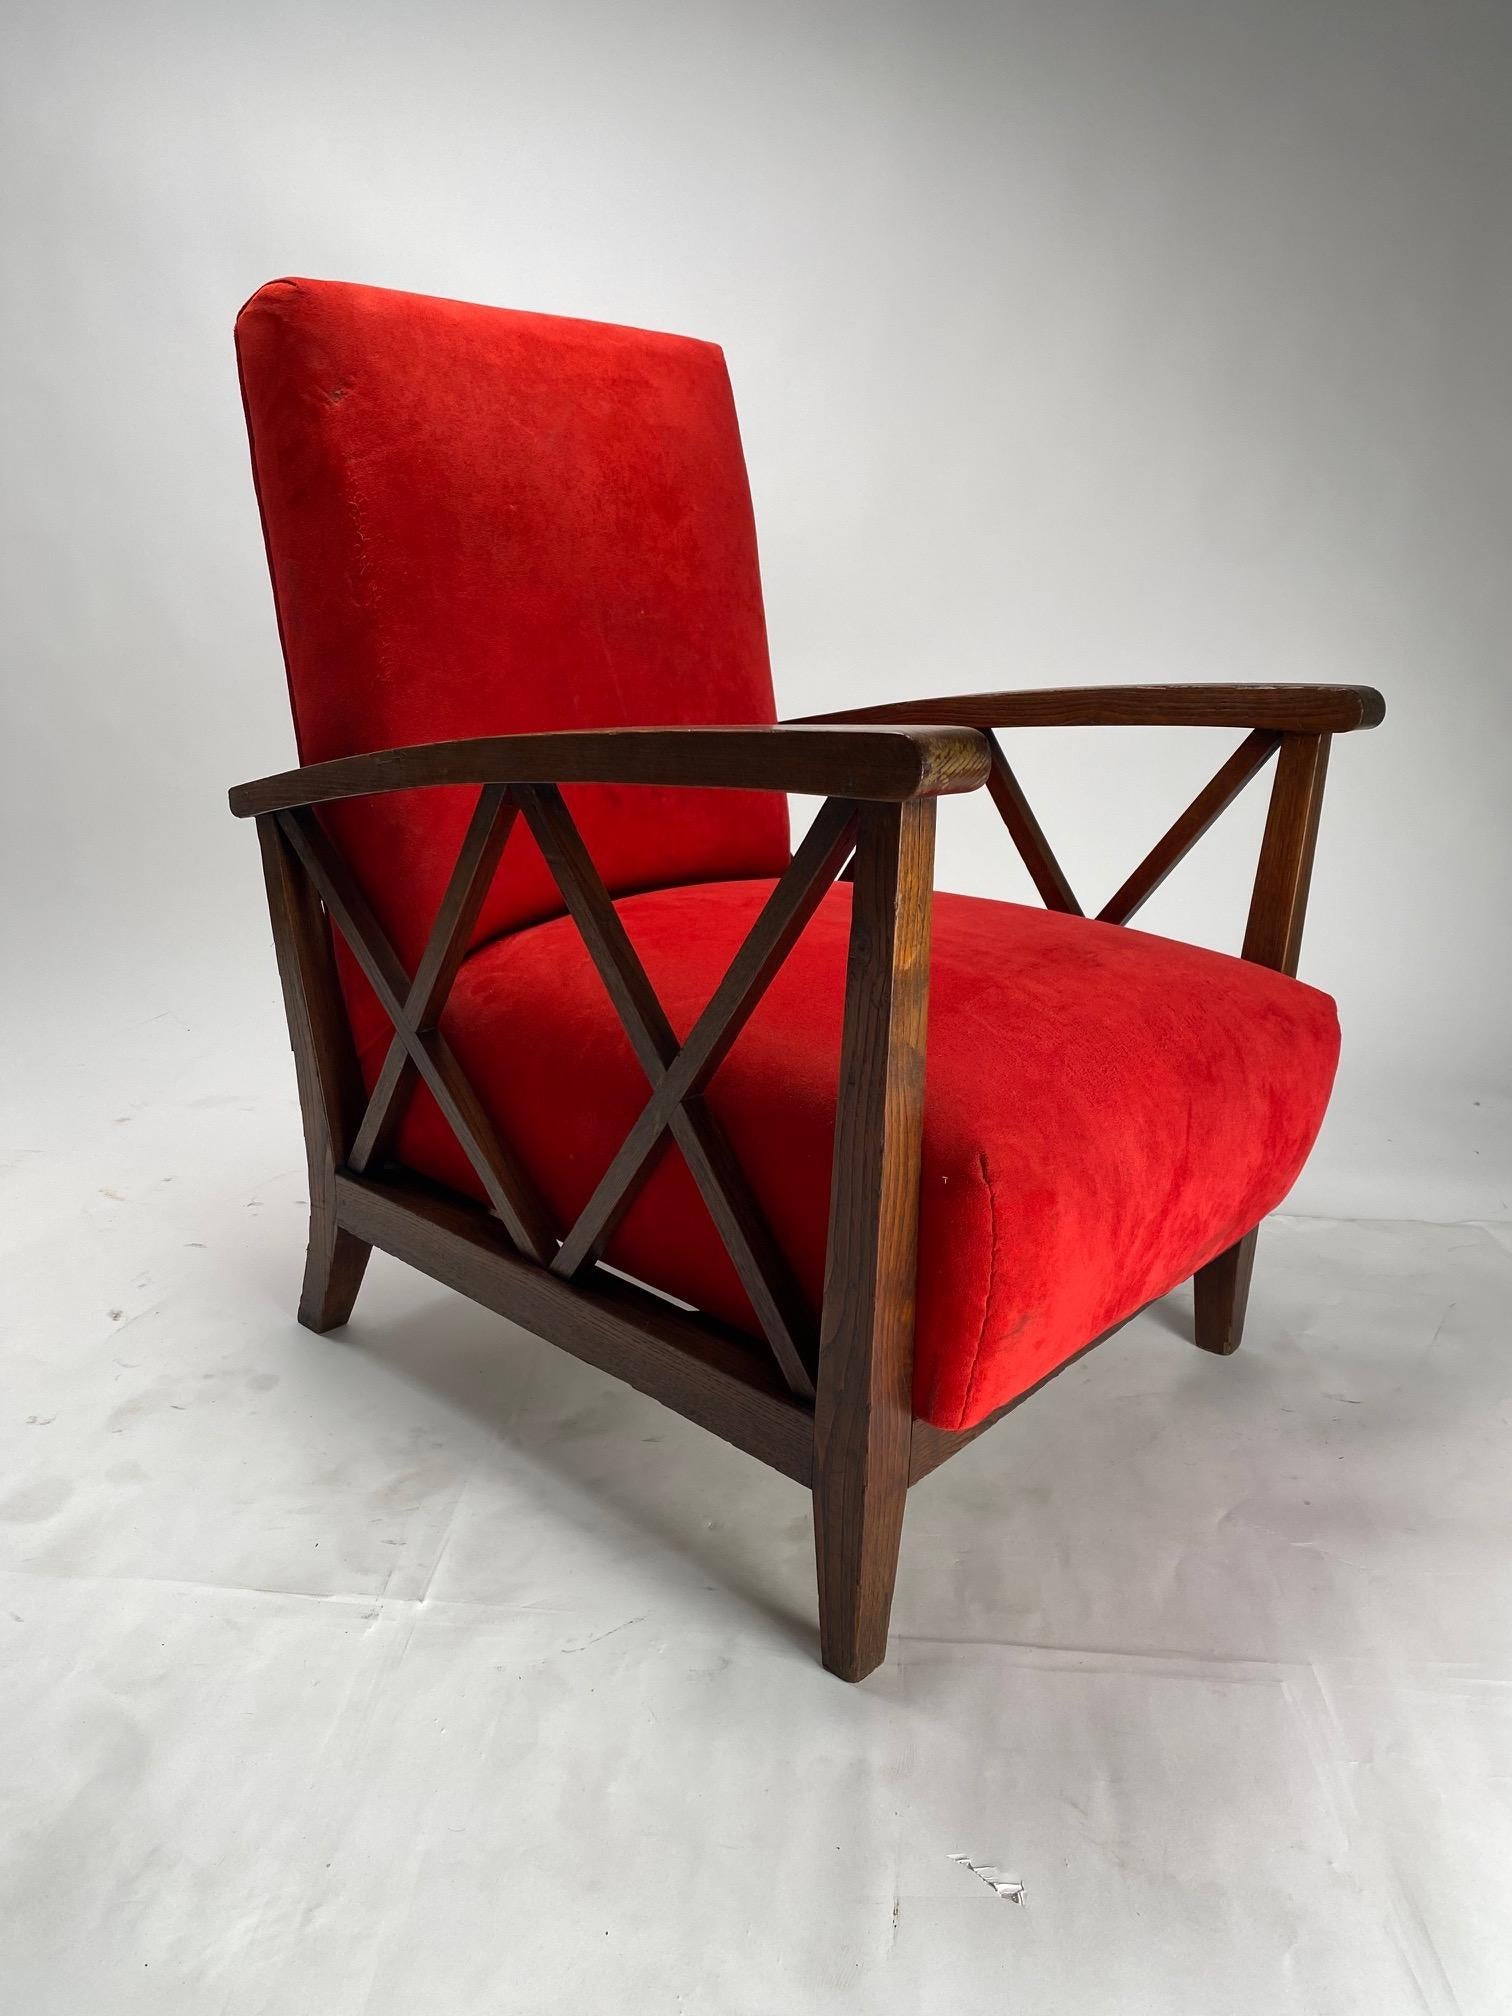 Pair of Mid-Century modern Armchairs with wooden structure and red fabric cushion, in the style of the Milanese architect Paolo Buffa.

We have kept the original fabric but we can customize the armchairs in the color and type of fabric preferred by